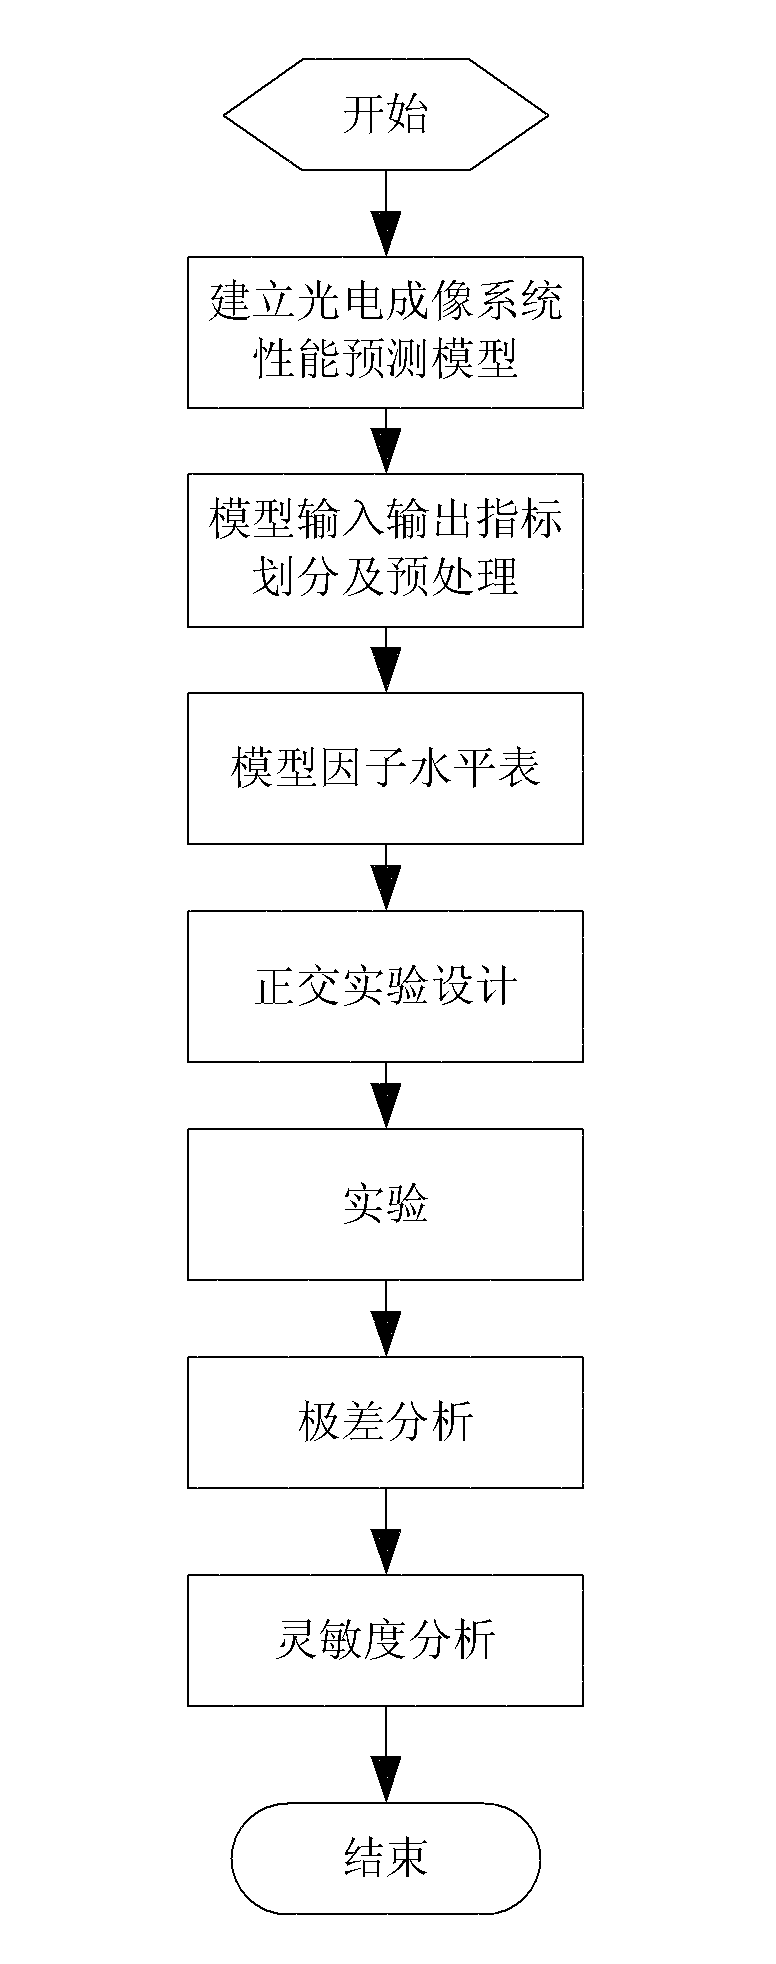 Performance evaluation experiment analysis method for photo-electric imaging system